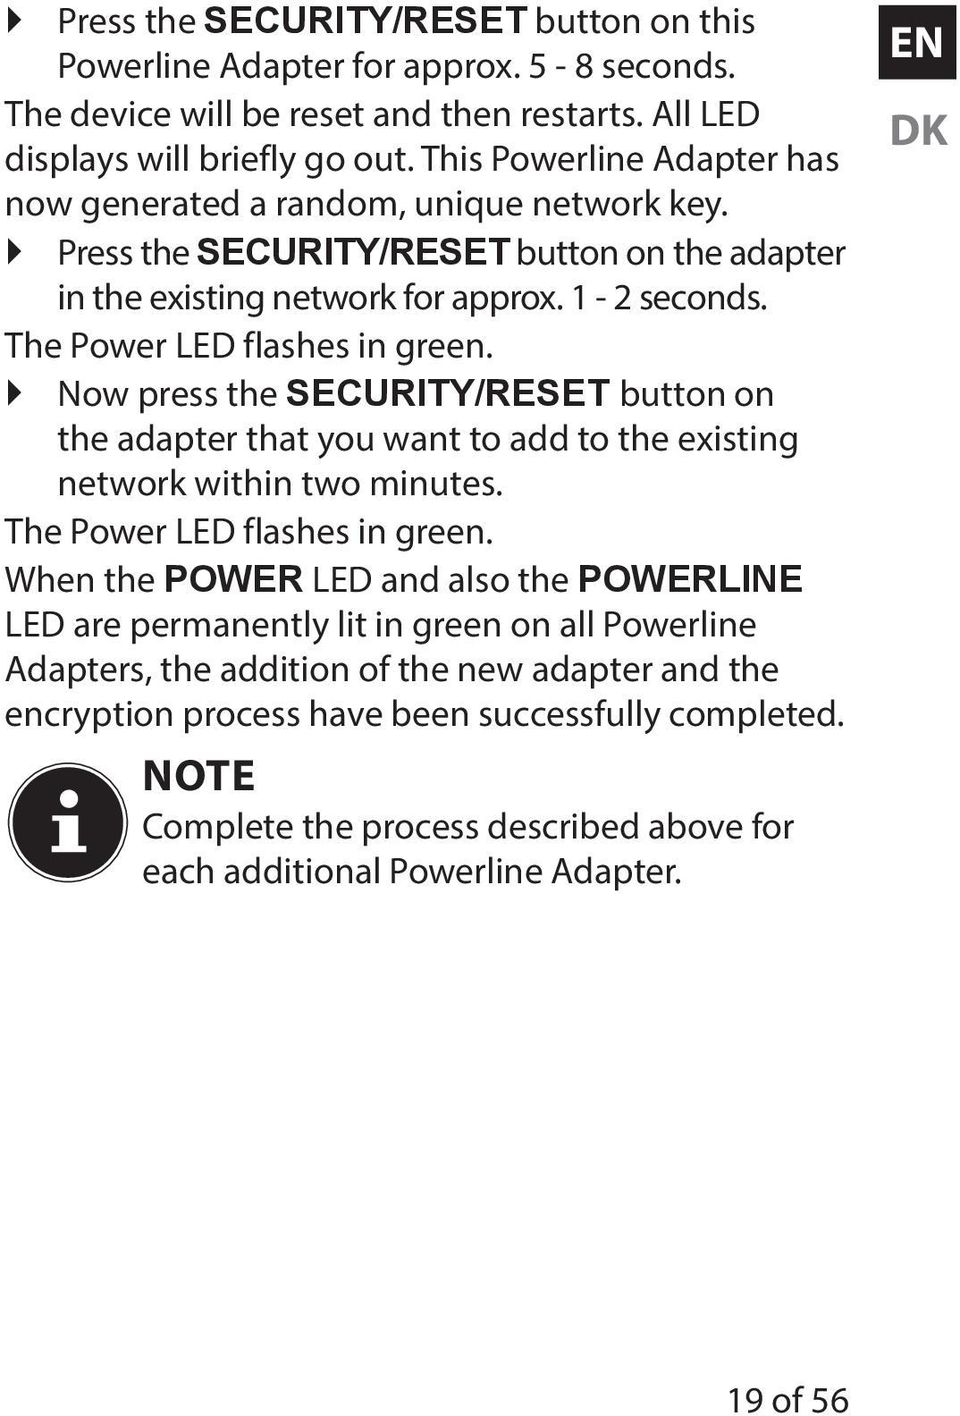 Now press the SECURITY/RESET button on the adapter that you want to add to the existing network within two minutes. The Power LED flashes in green.